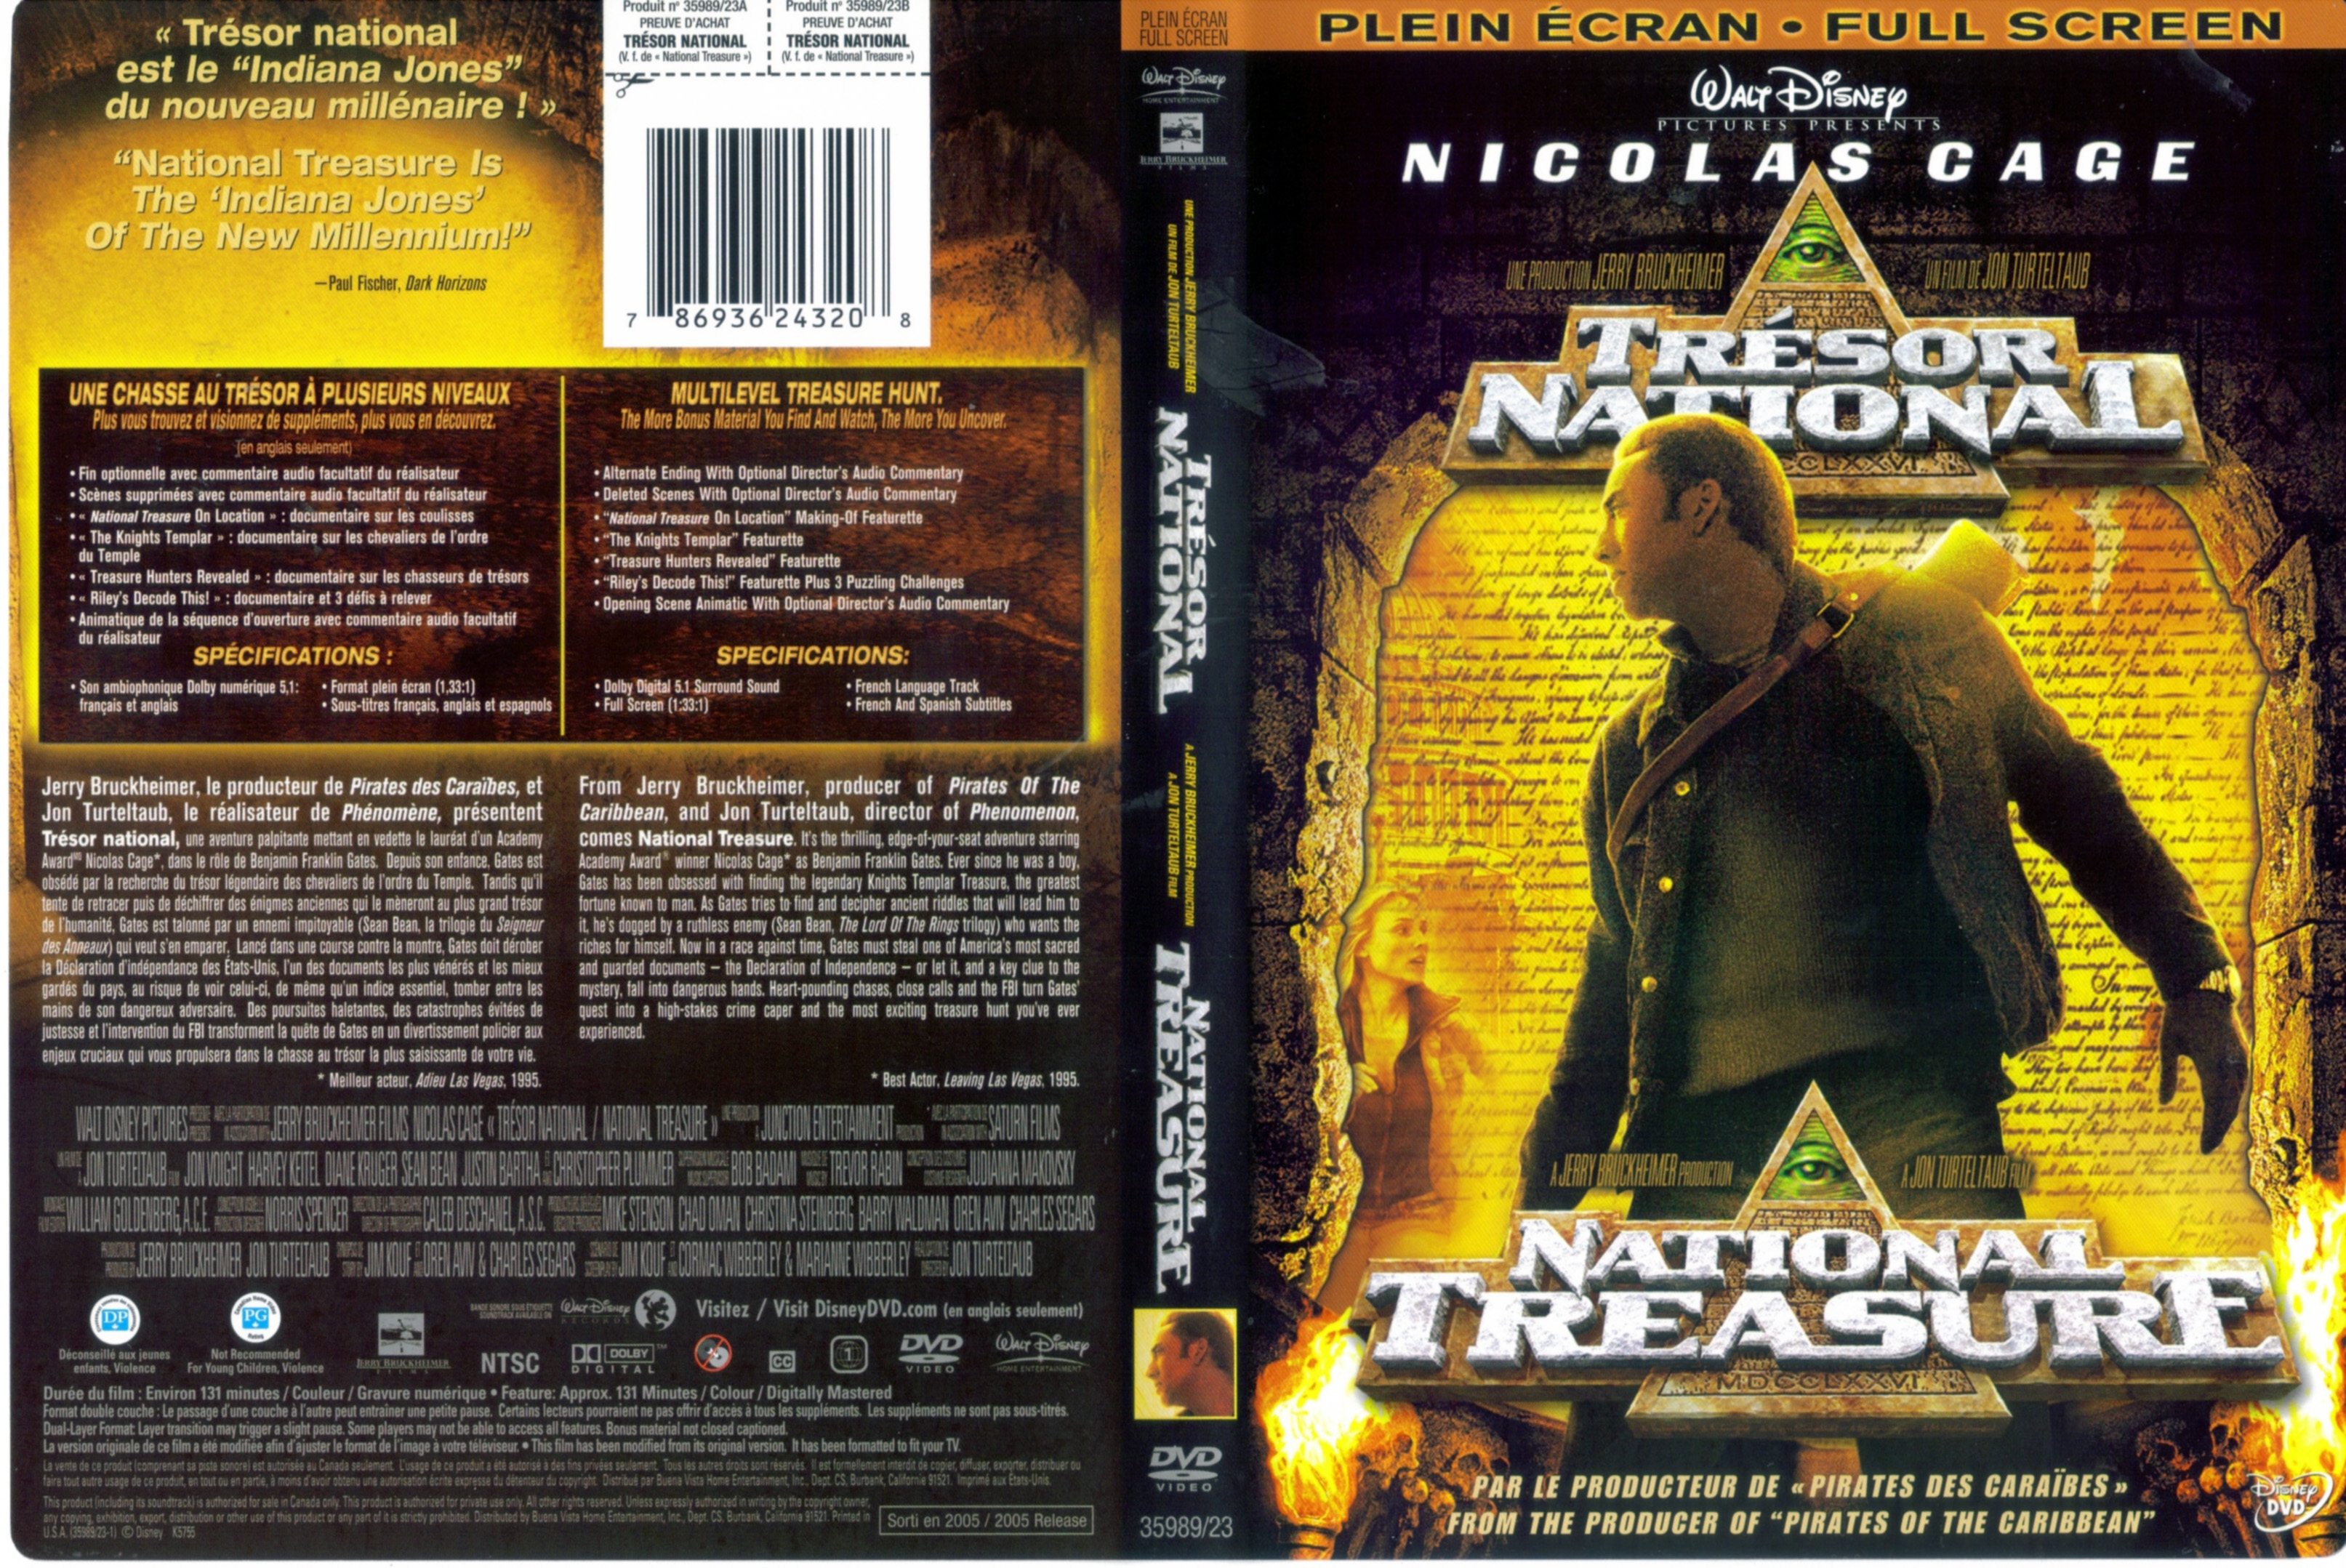 Jaquette DVD Trsor National - National treasure (Canadienne)